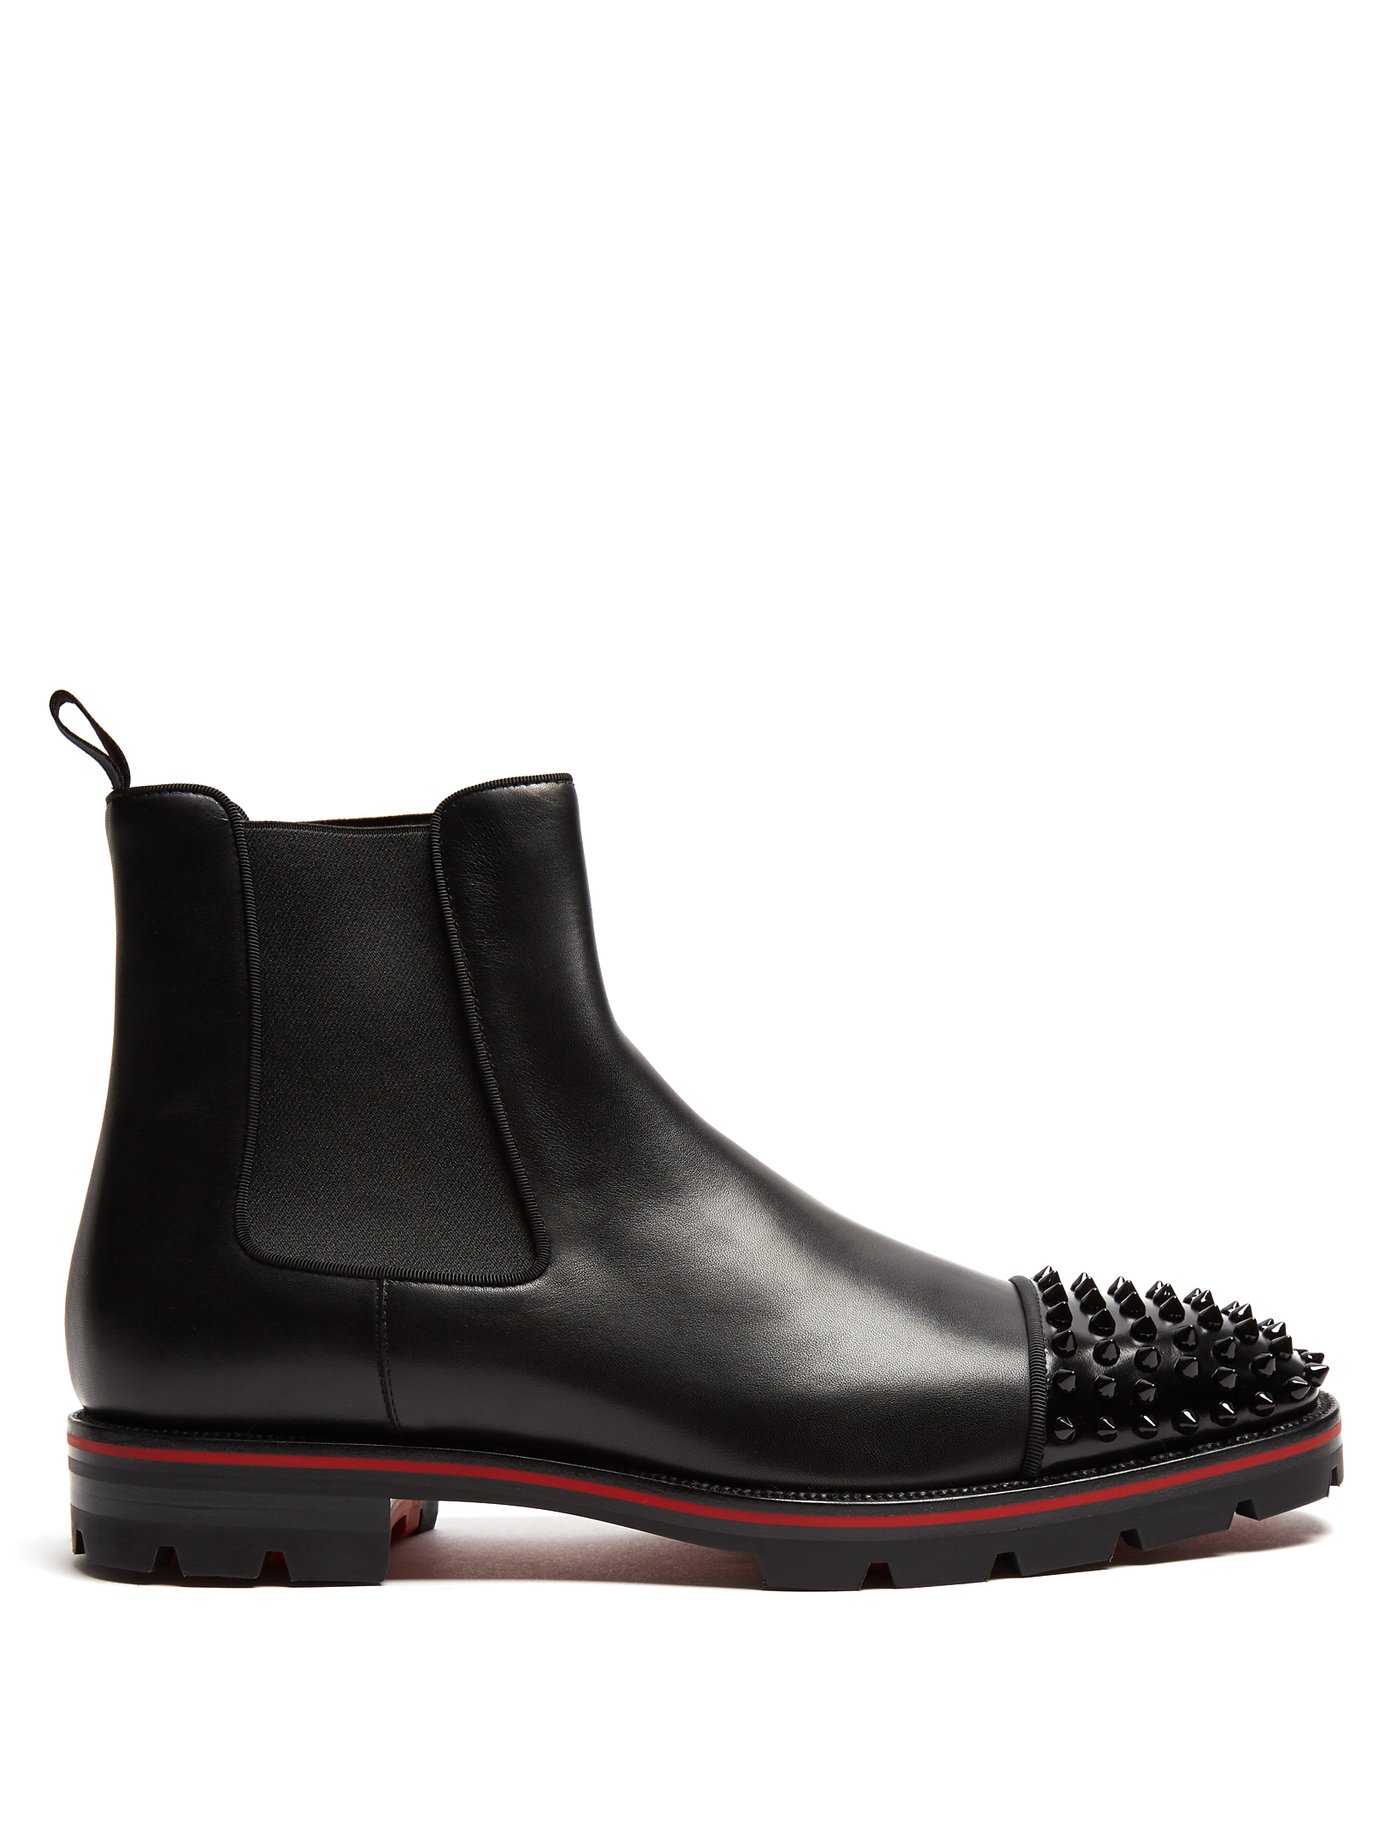 CHRISTIAN LOUBOUTIN Melon Leather Chelsea Boots in Black | ModeSens